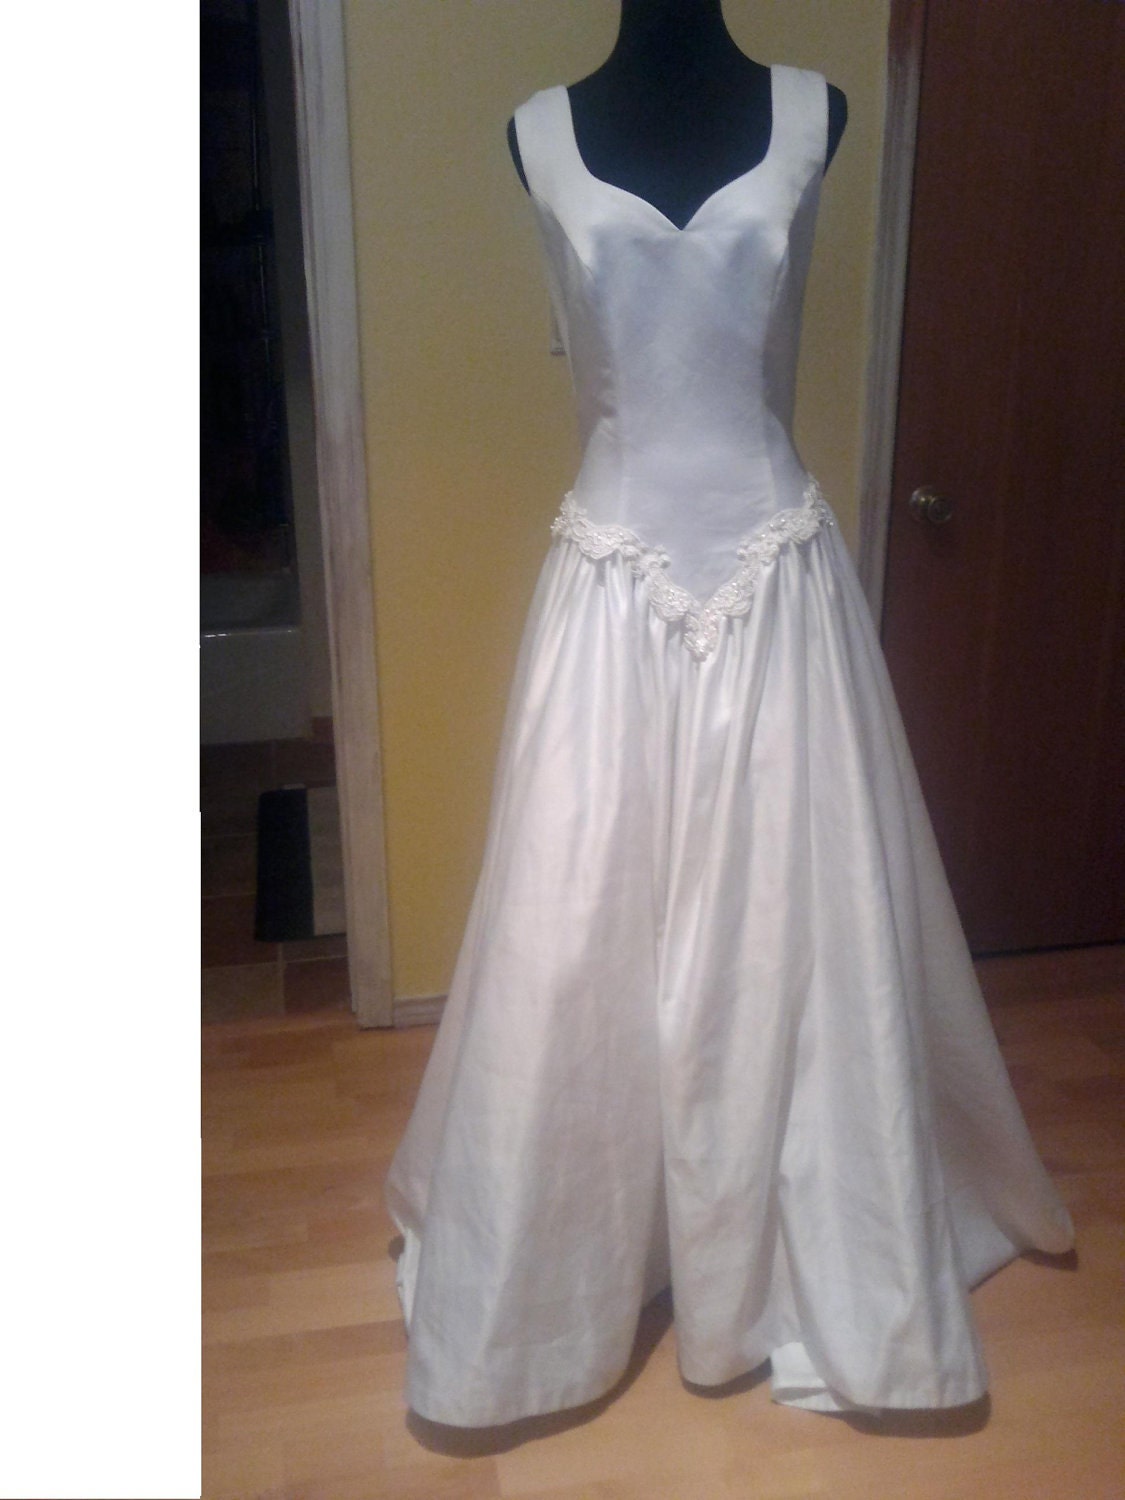 Late 80s Ball room style wedding dress From wintercarnival1930